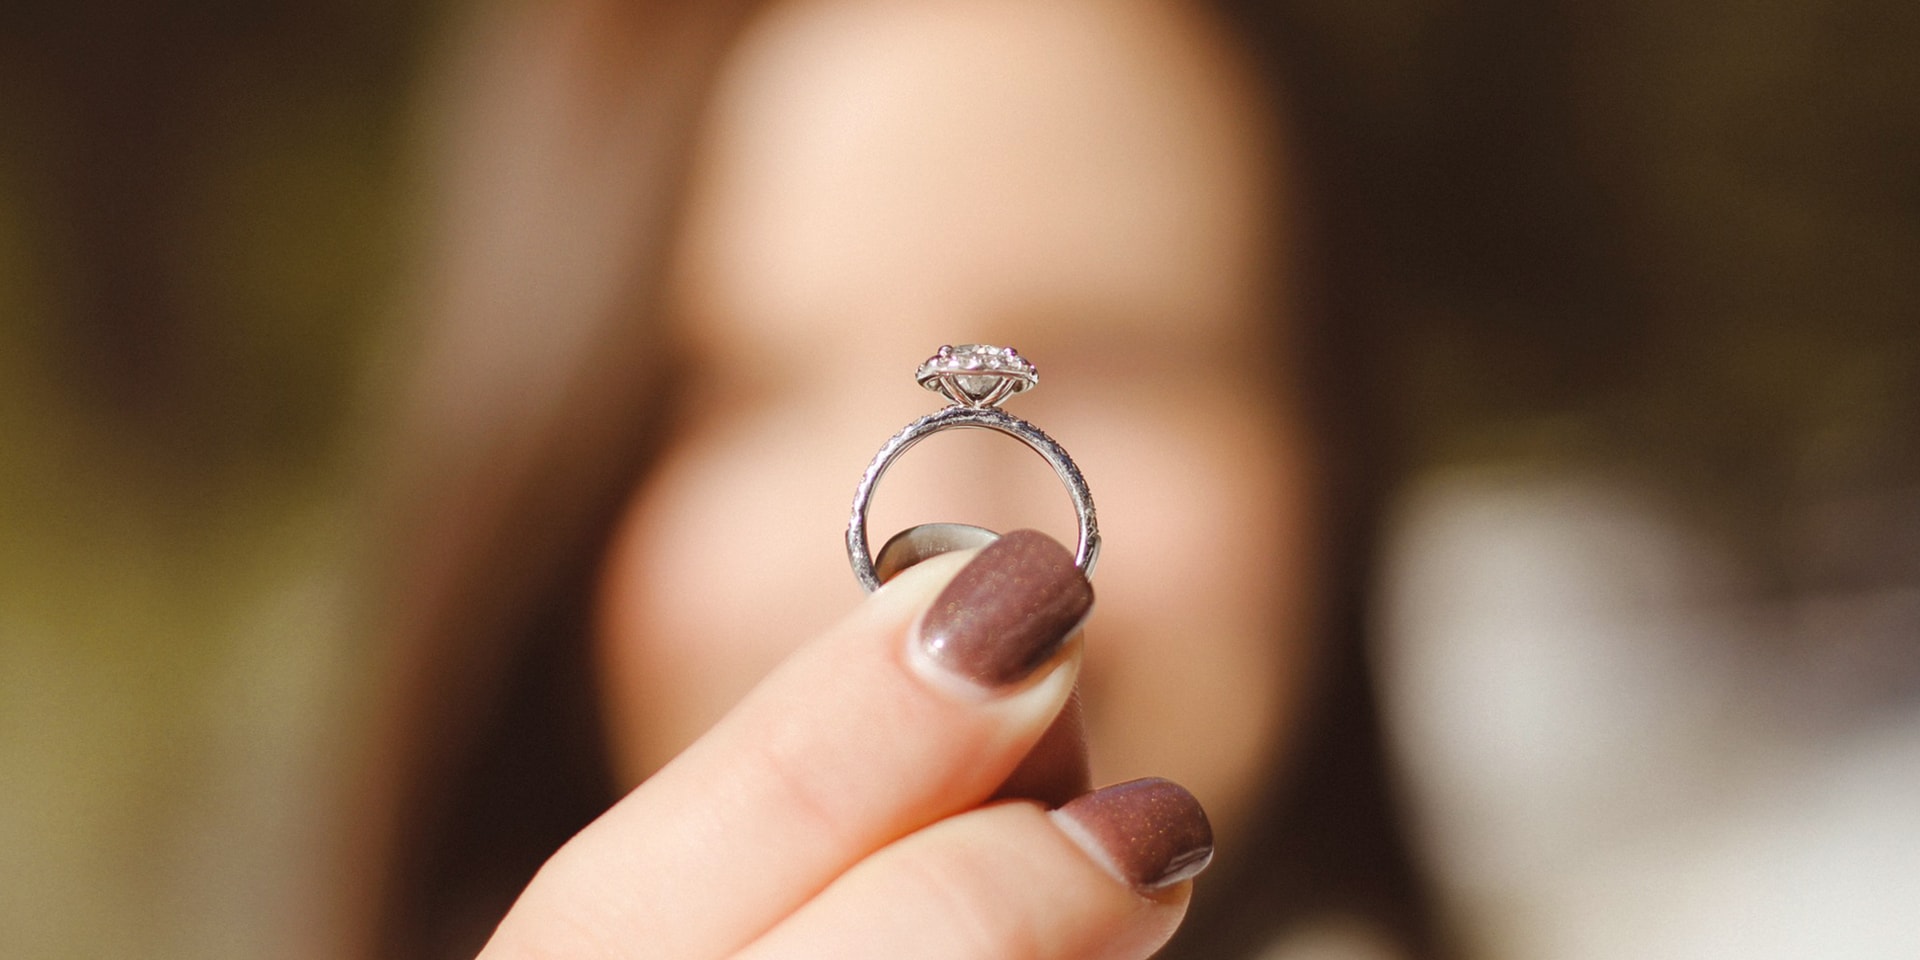 5 Common Jewelry Photography Mistakes You Should Take Care Of